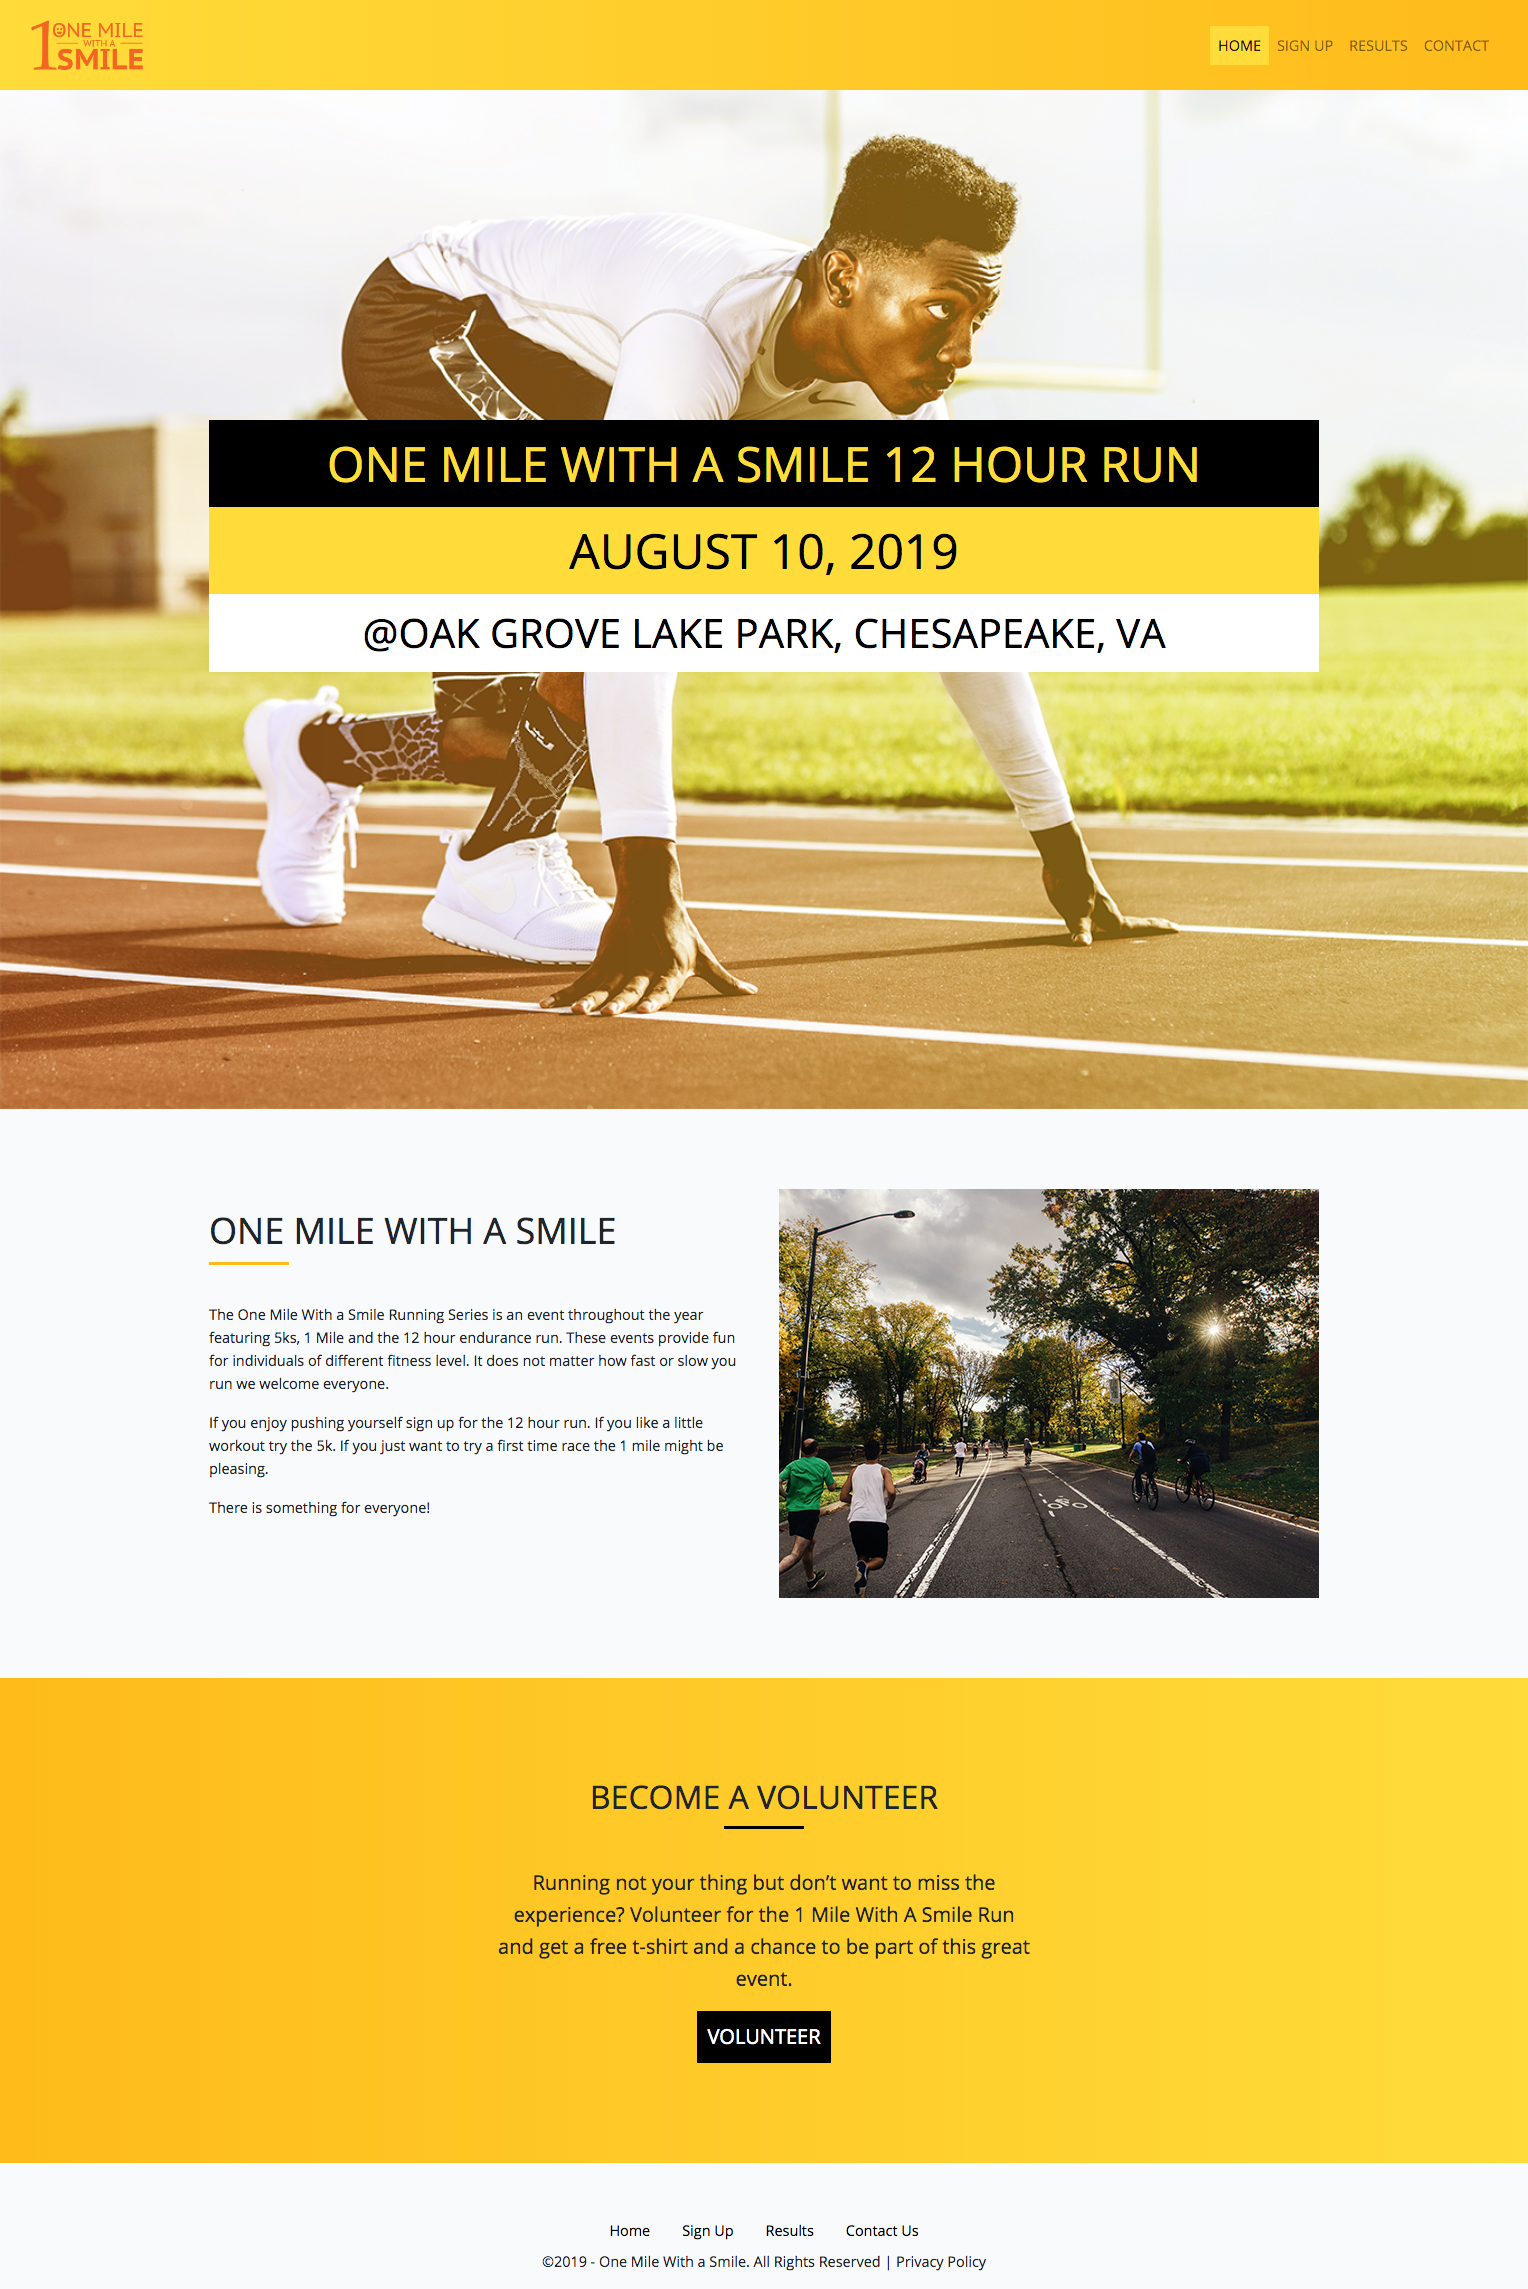 One Mile With a Smile